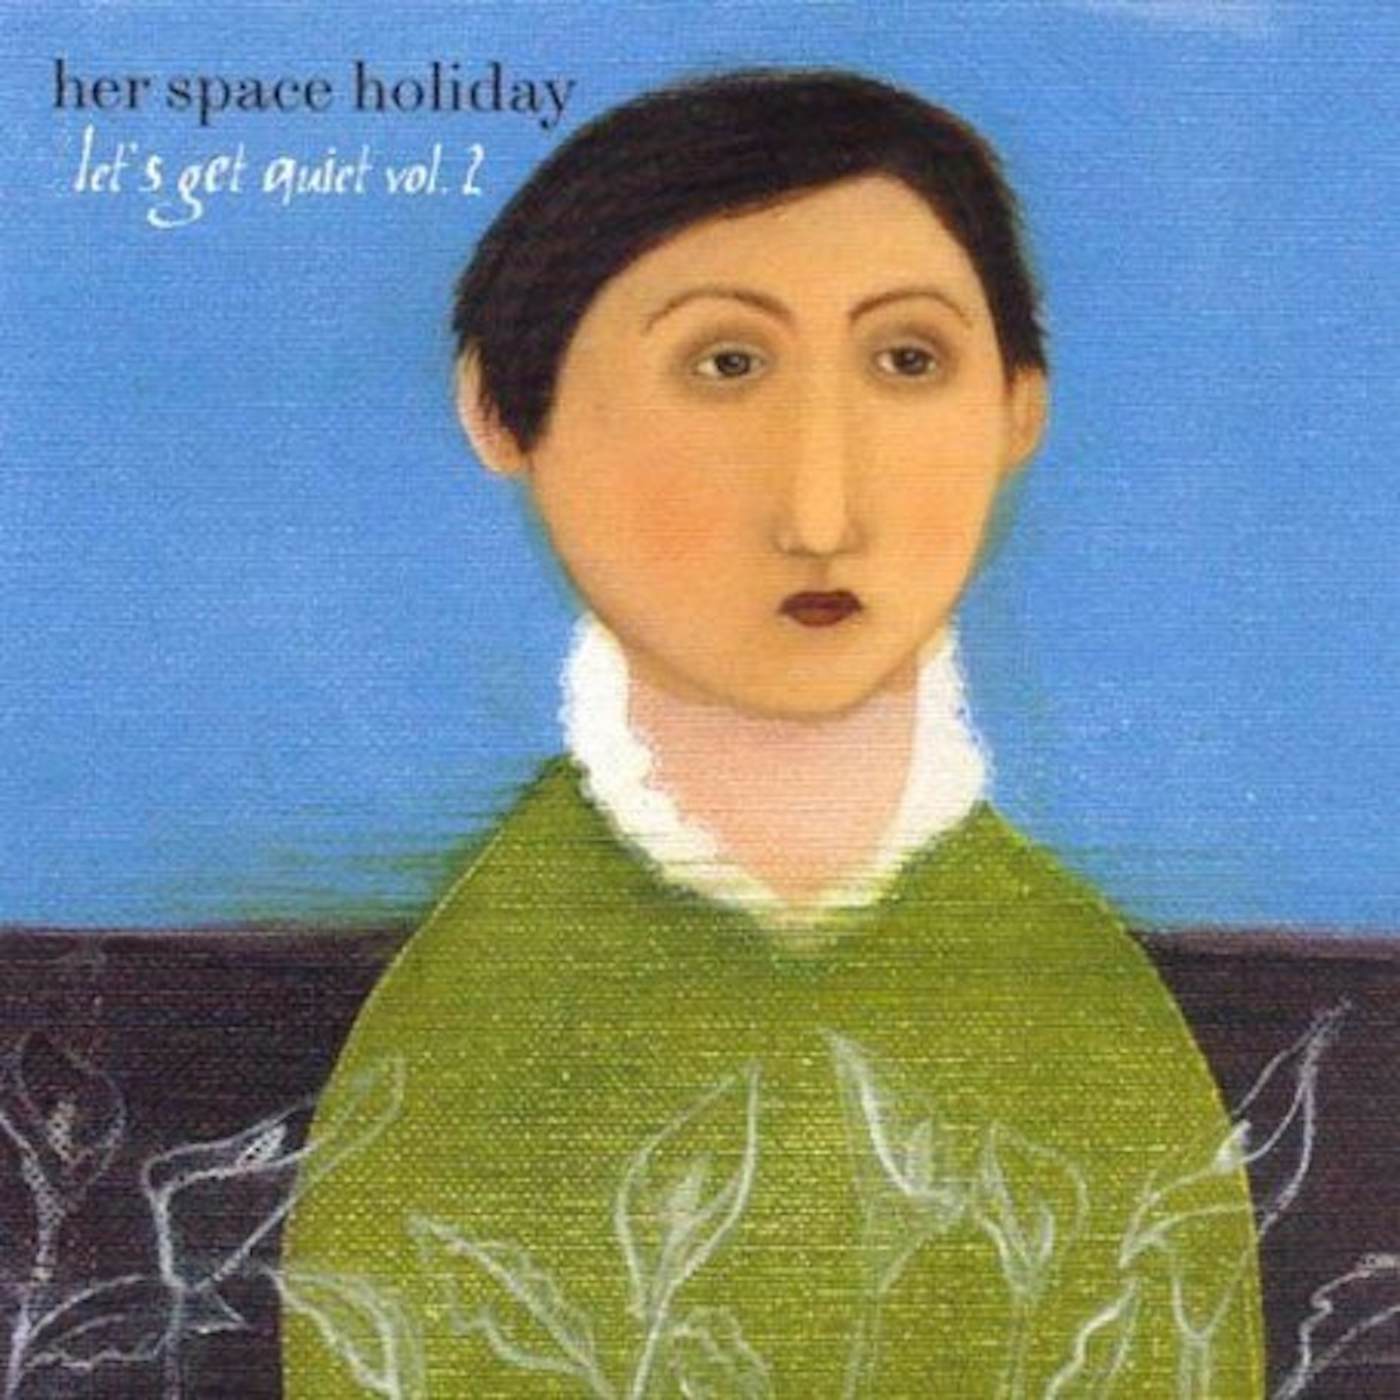 Her Space Holiday LET'S GET QUIET 2 CD